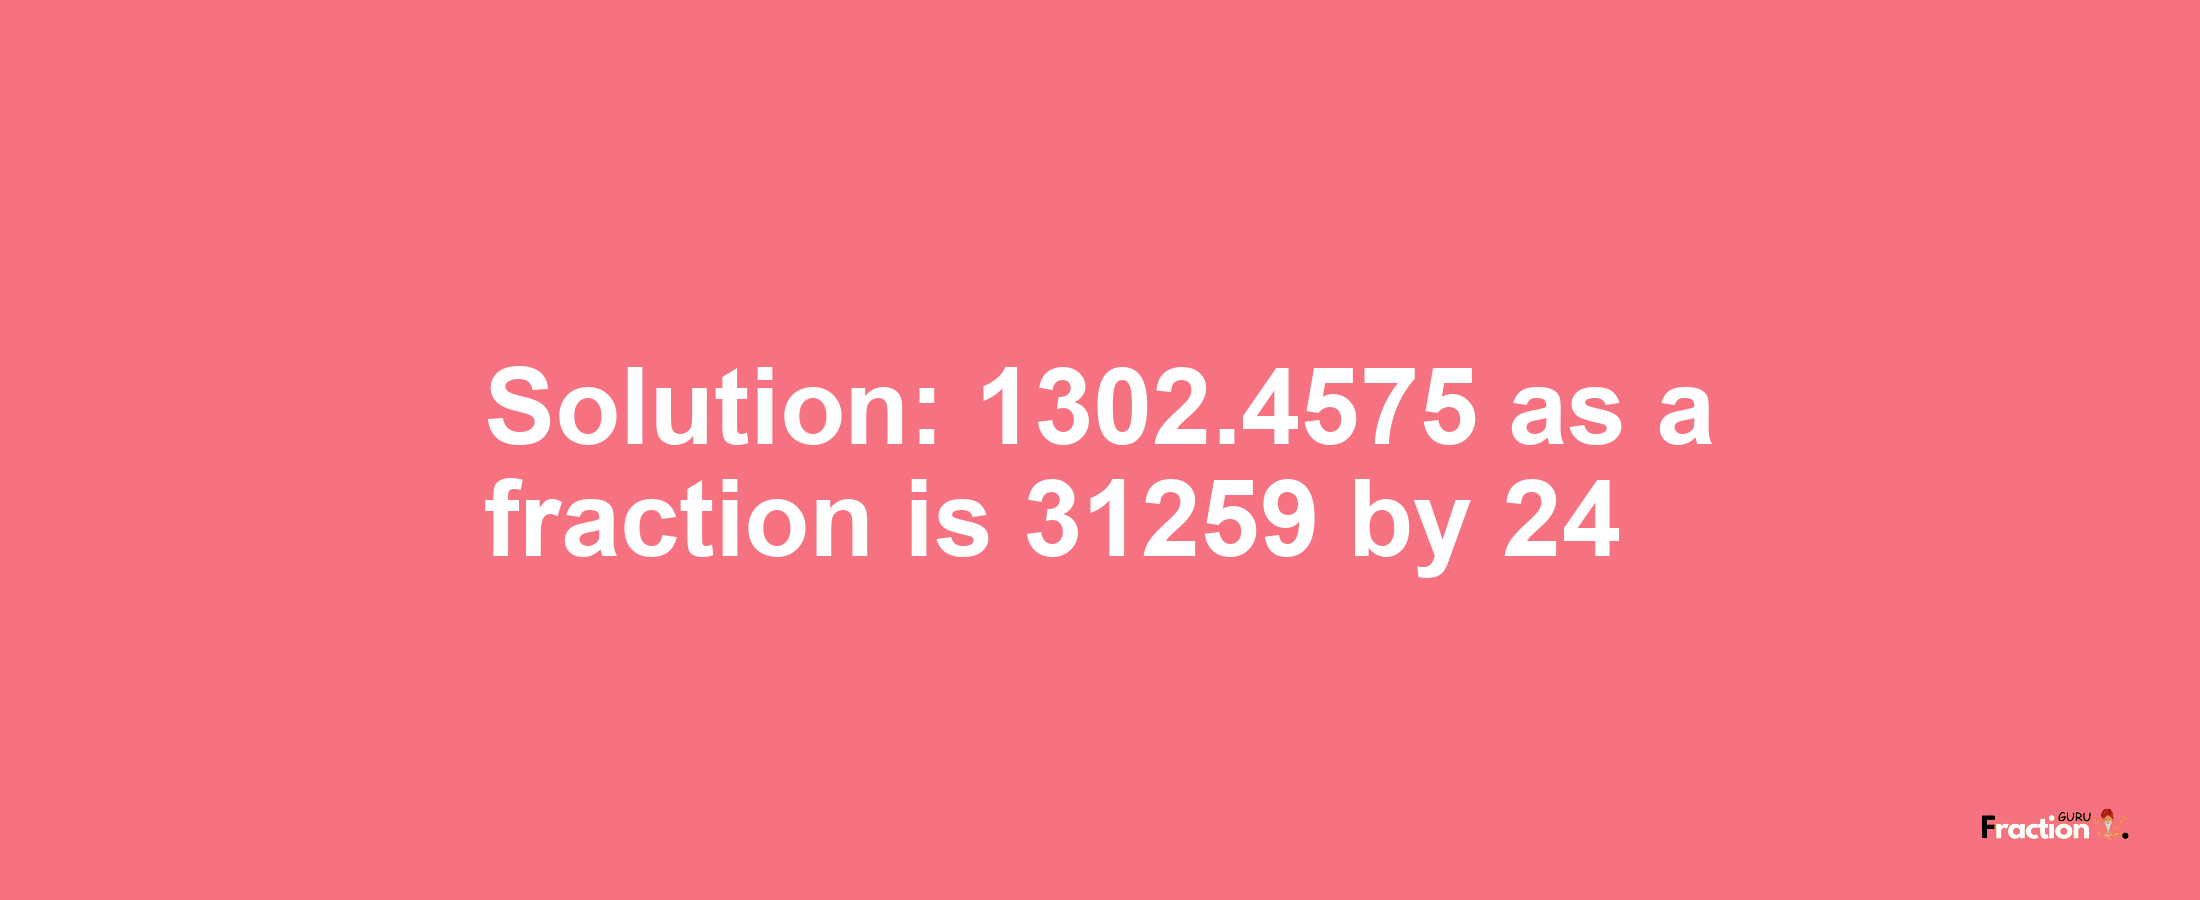 Solution:1302.4575 as a fraction is 31259/24